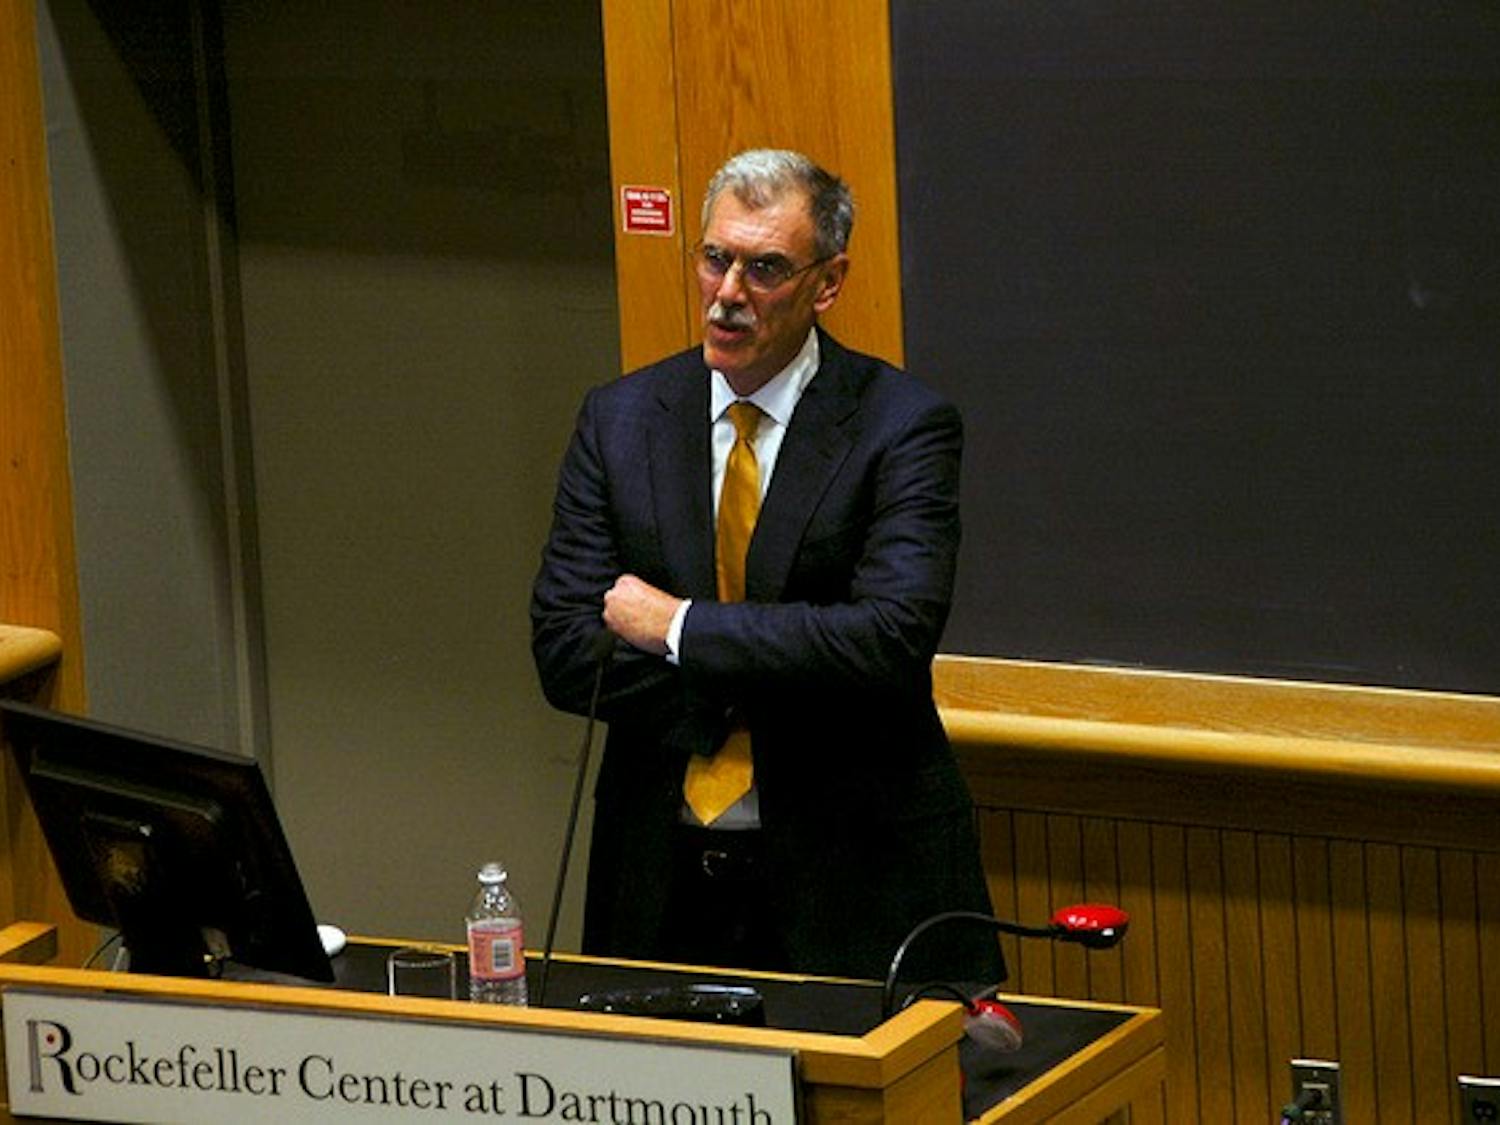 U.S. Solicitor General Donald Verrilli discussed whether or not the executive branch is required to defend federal laws in court in a Thursday lecture.